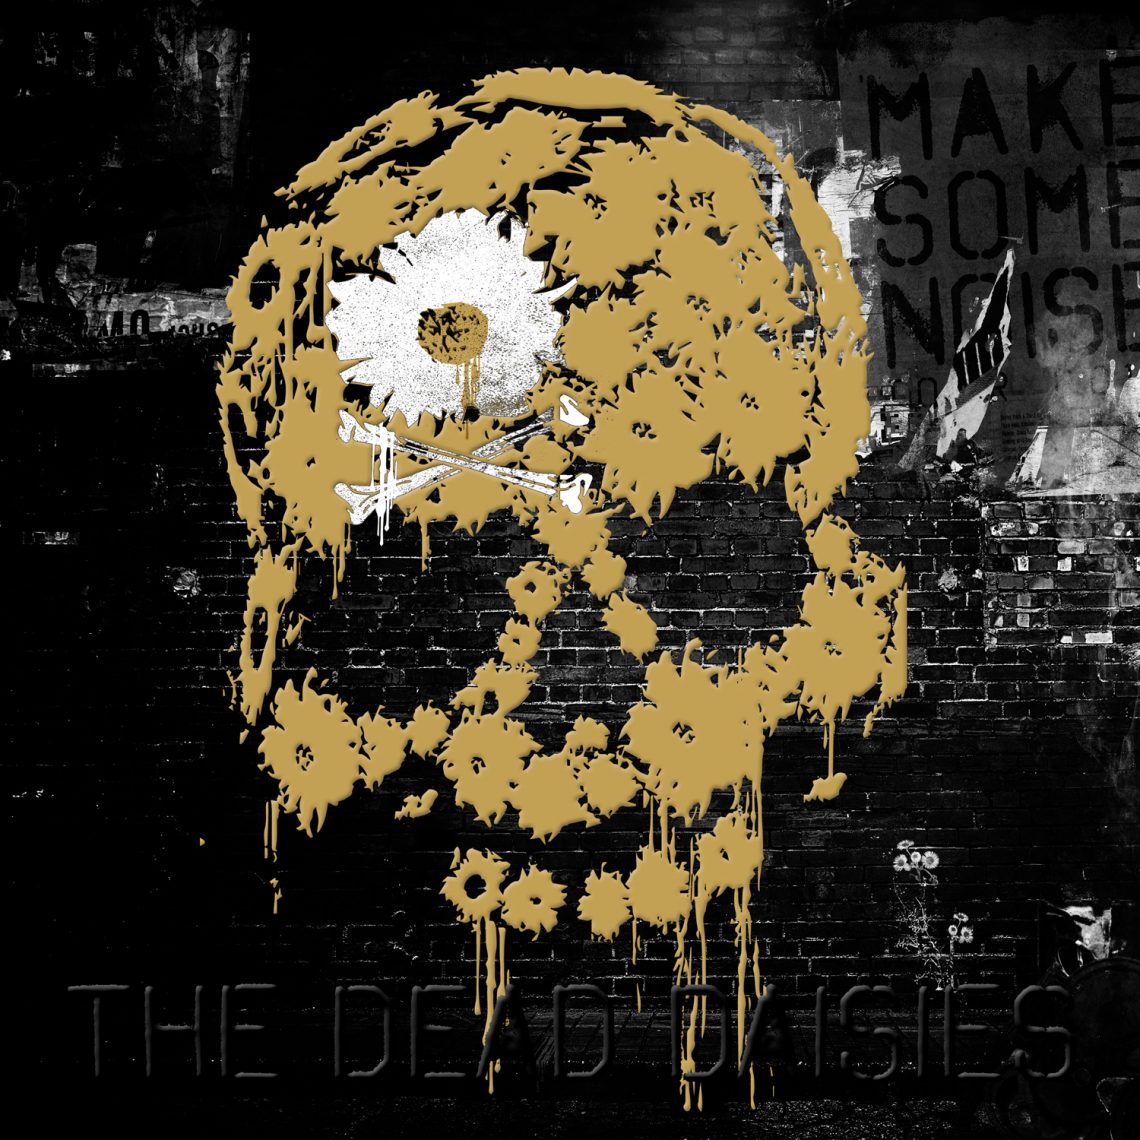 THE DEAD DAISIES New Album MAKE SOME NOISE released today 5th August